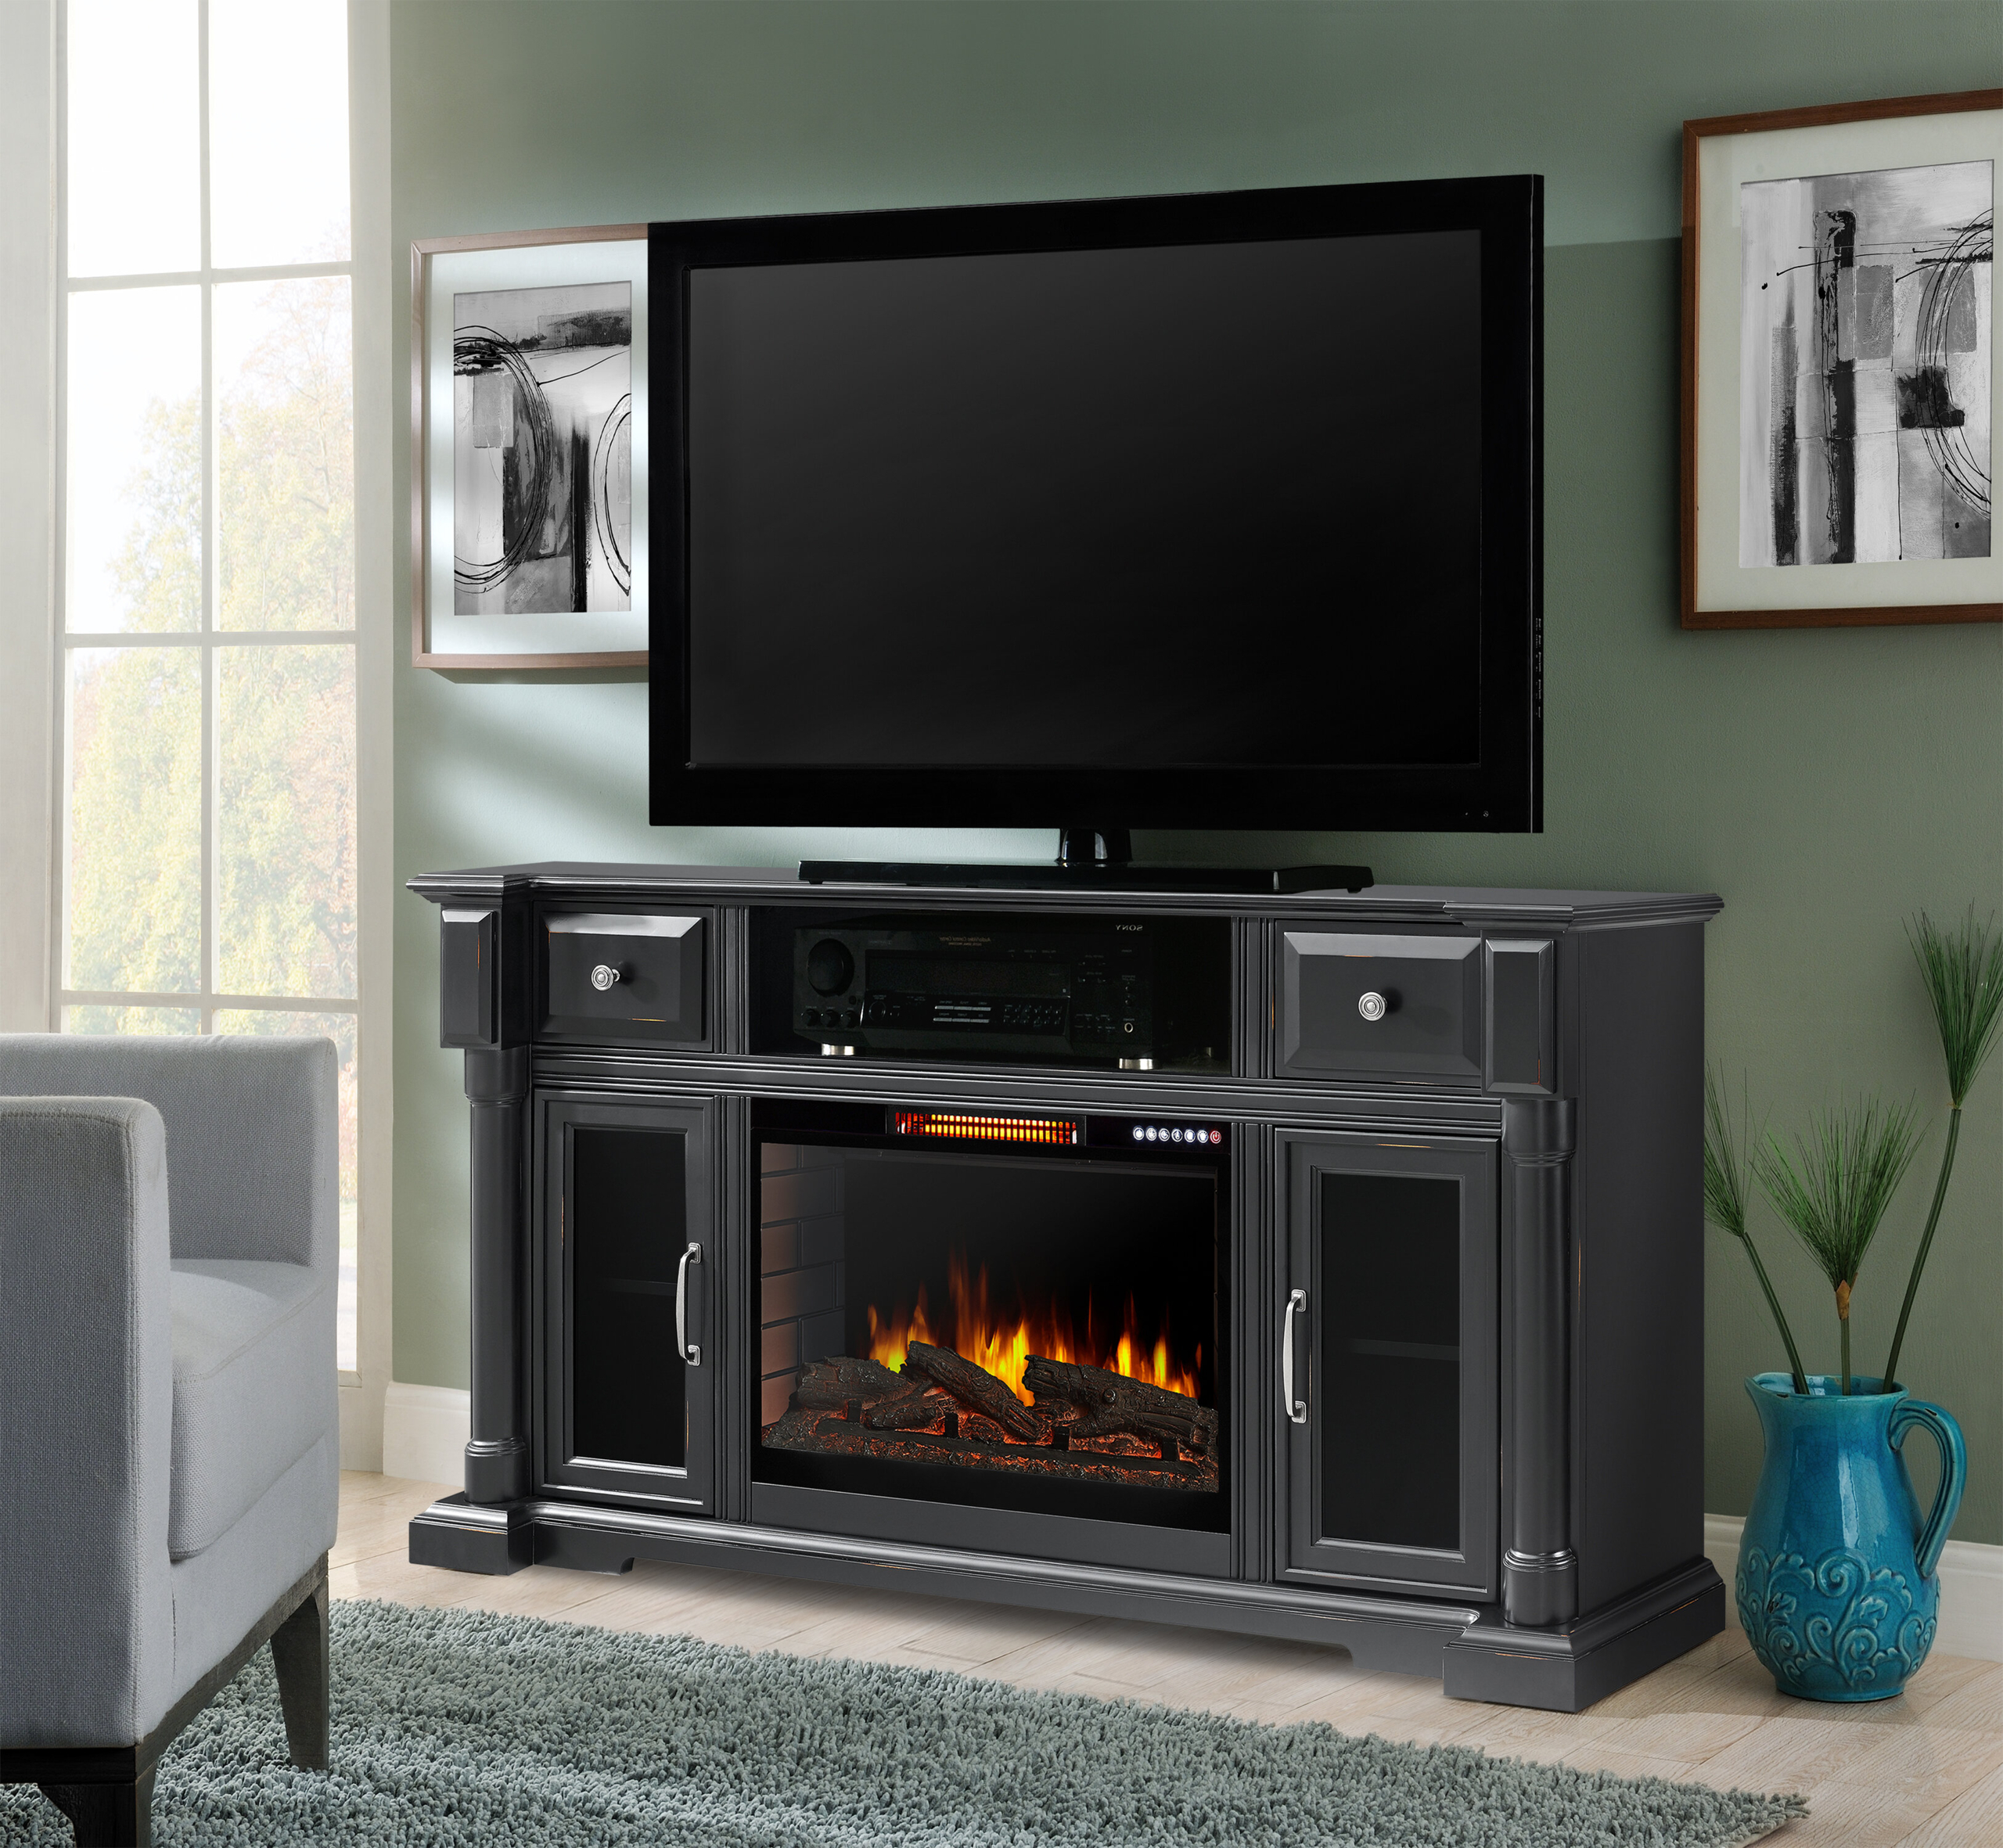 Vermont TV Stand for TVs up to 78" with Electric Fireplace Included